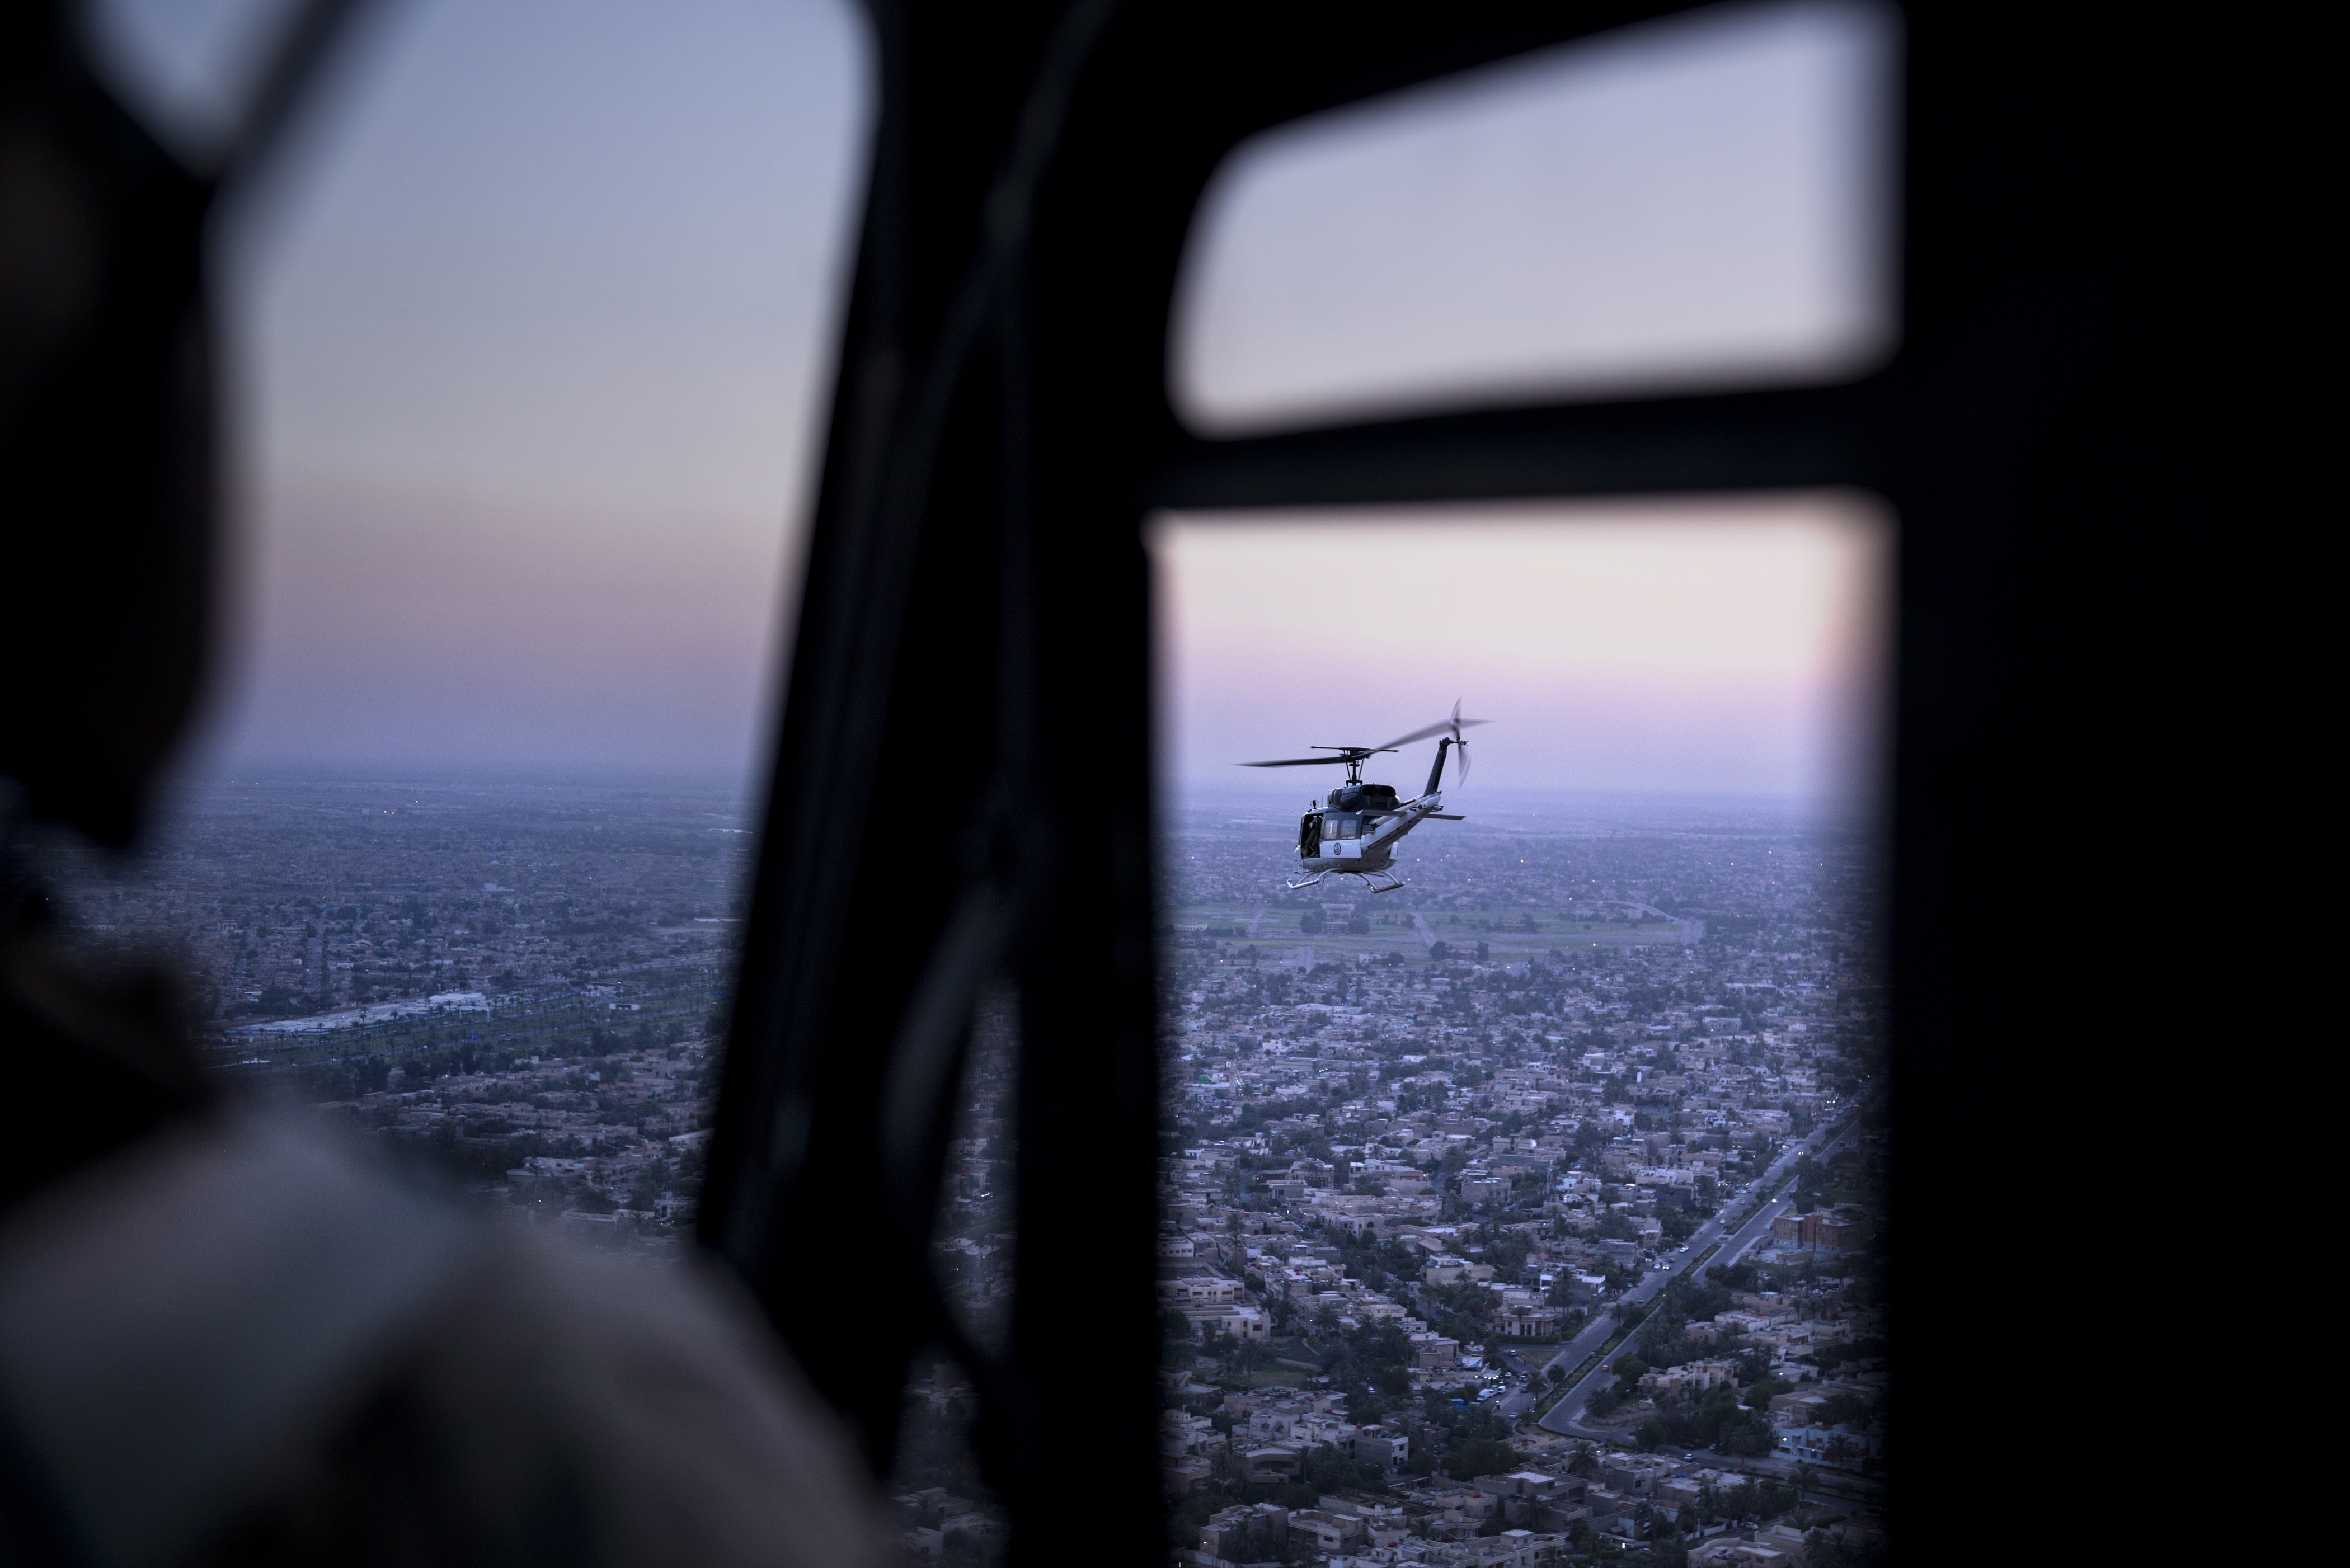 A picture taken on board a helicopter shows a US State Department helicopter flying over the Iraqi capital Baghdad as it transports US Secretary of State John Kerry on June 23, 2014, in Baghdad. (Brendan Smialowski—AFP/Getty Images)